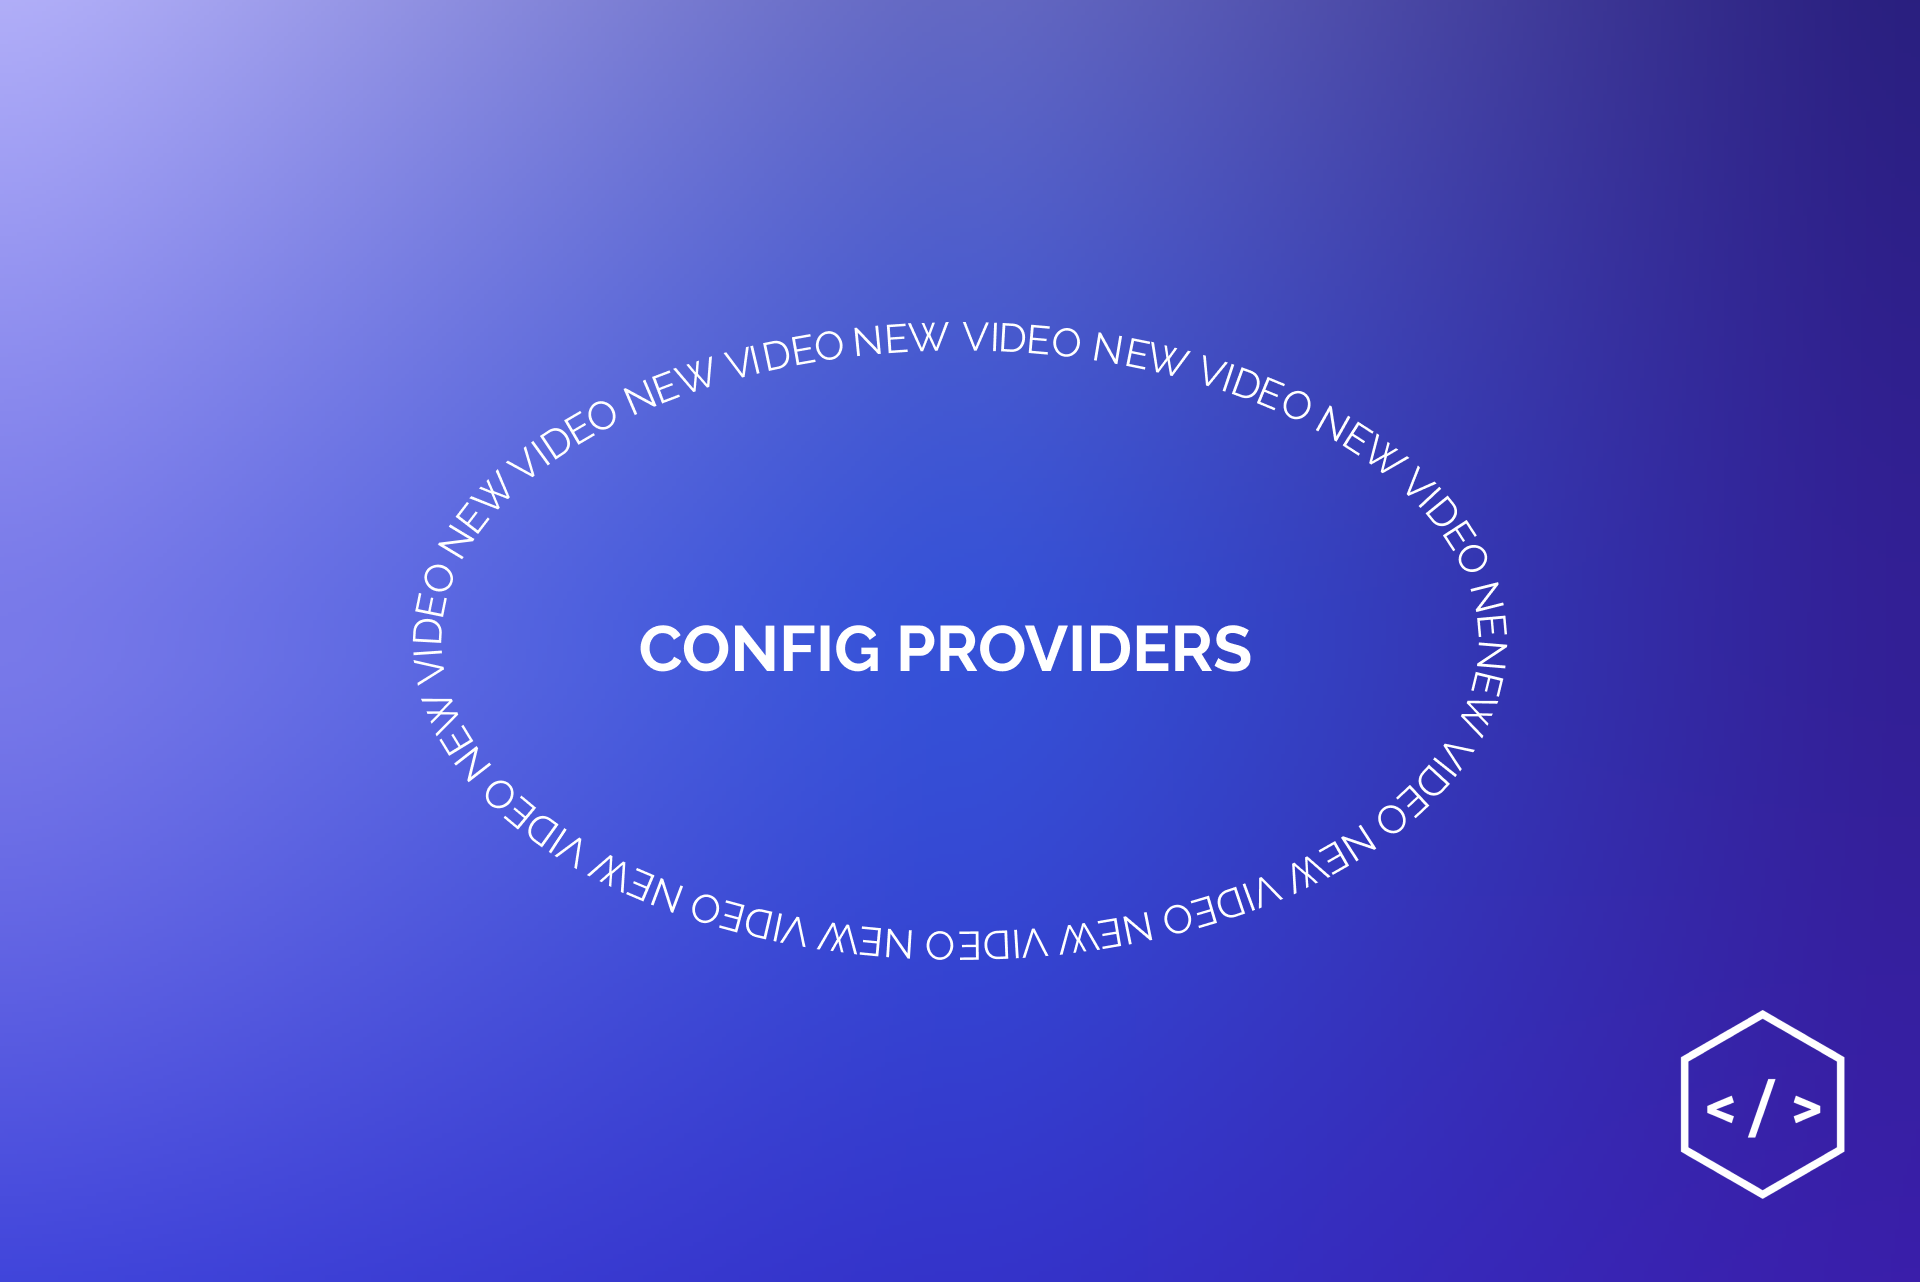 How to config providers?